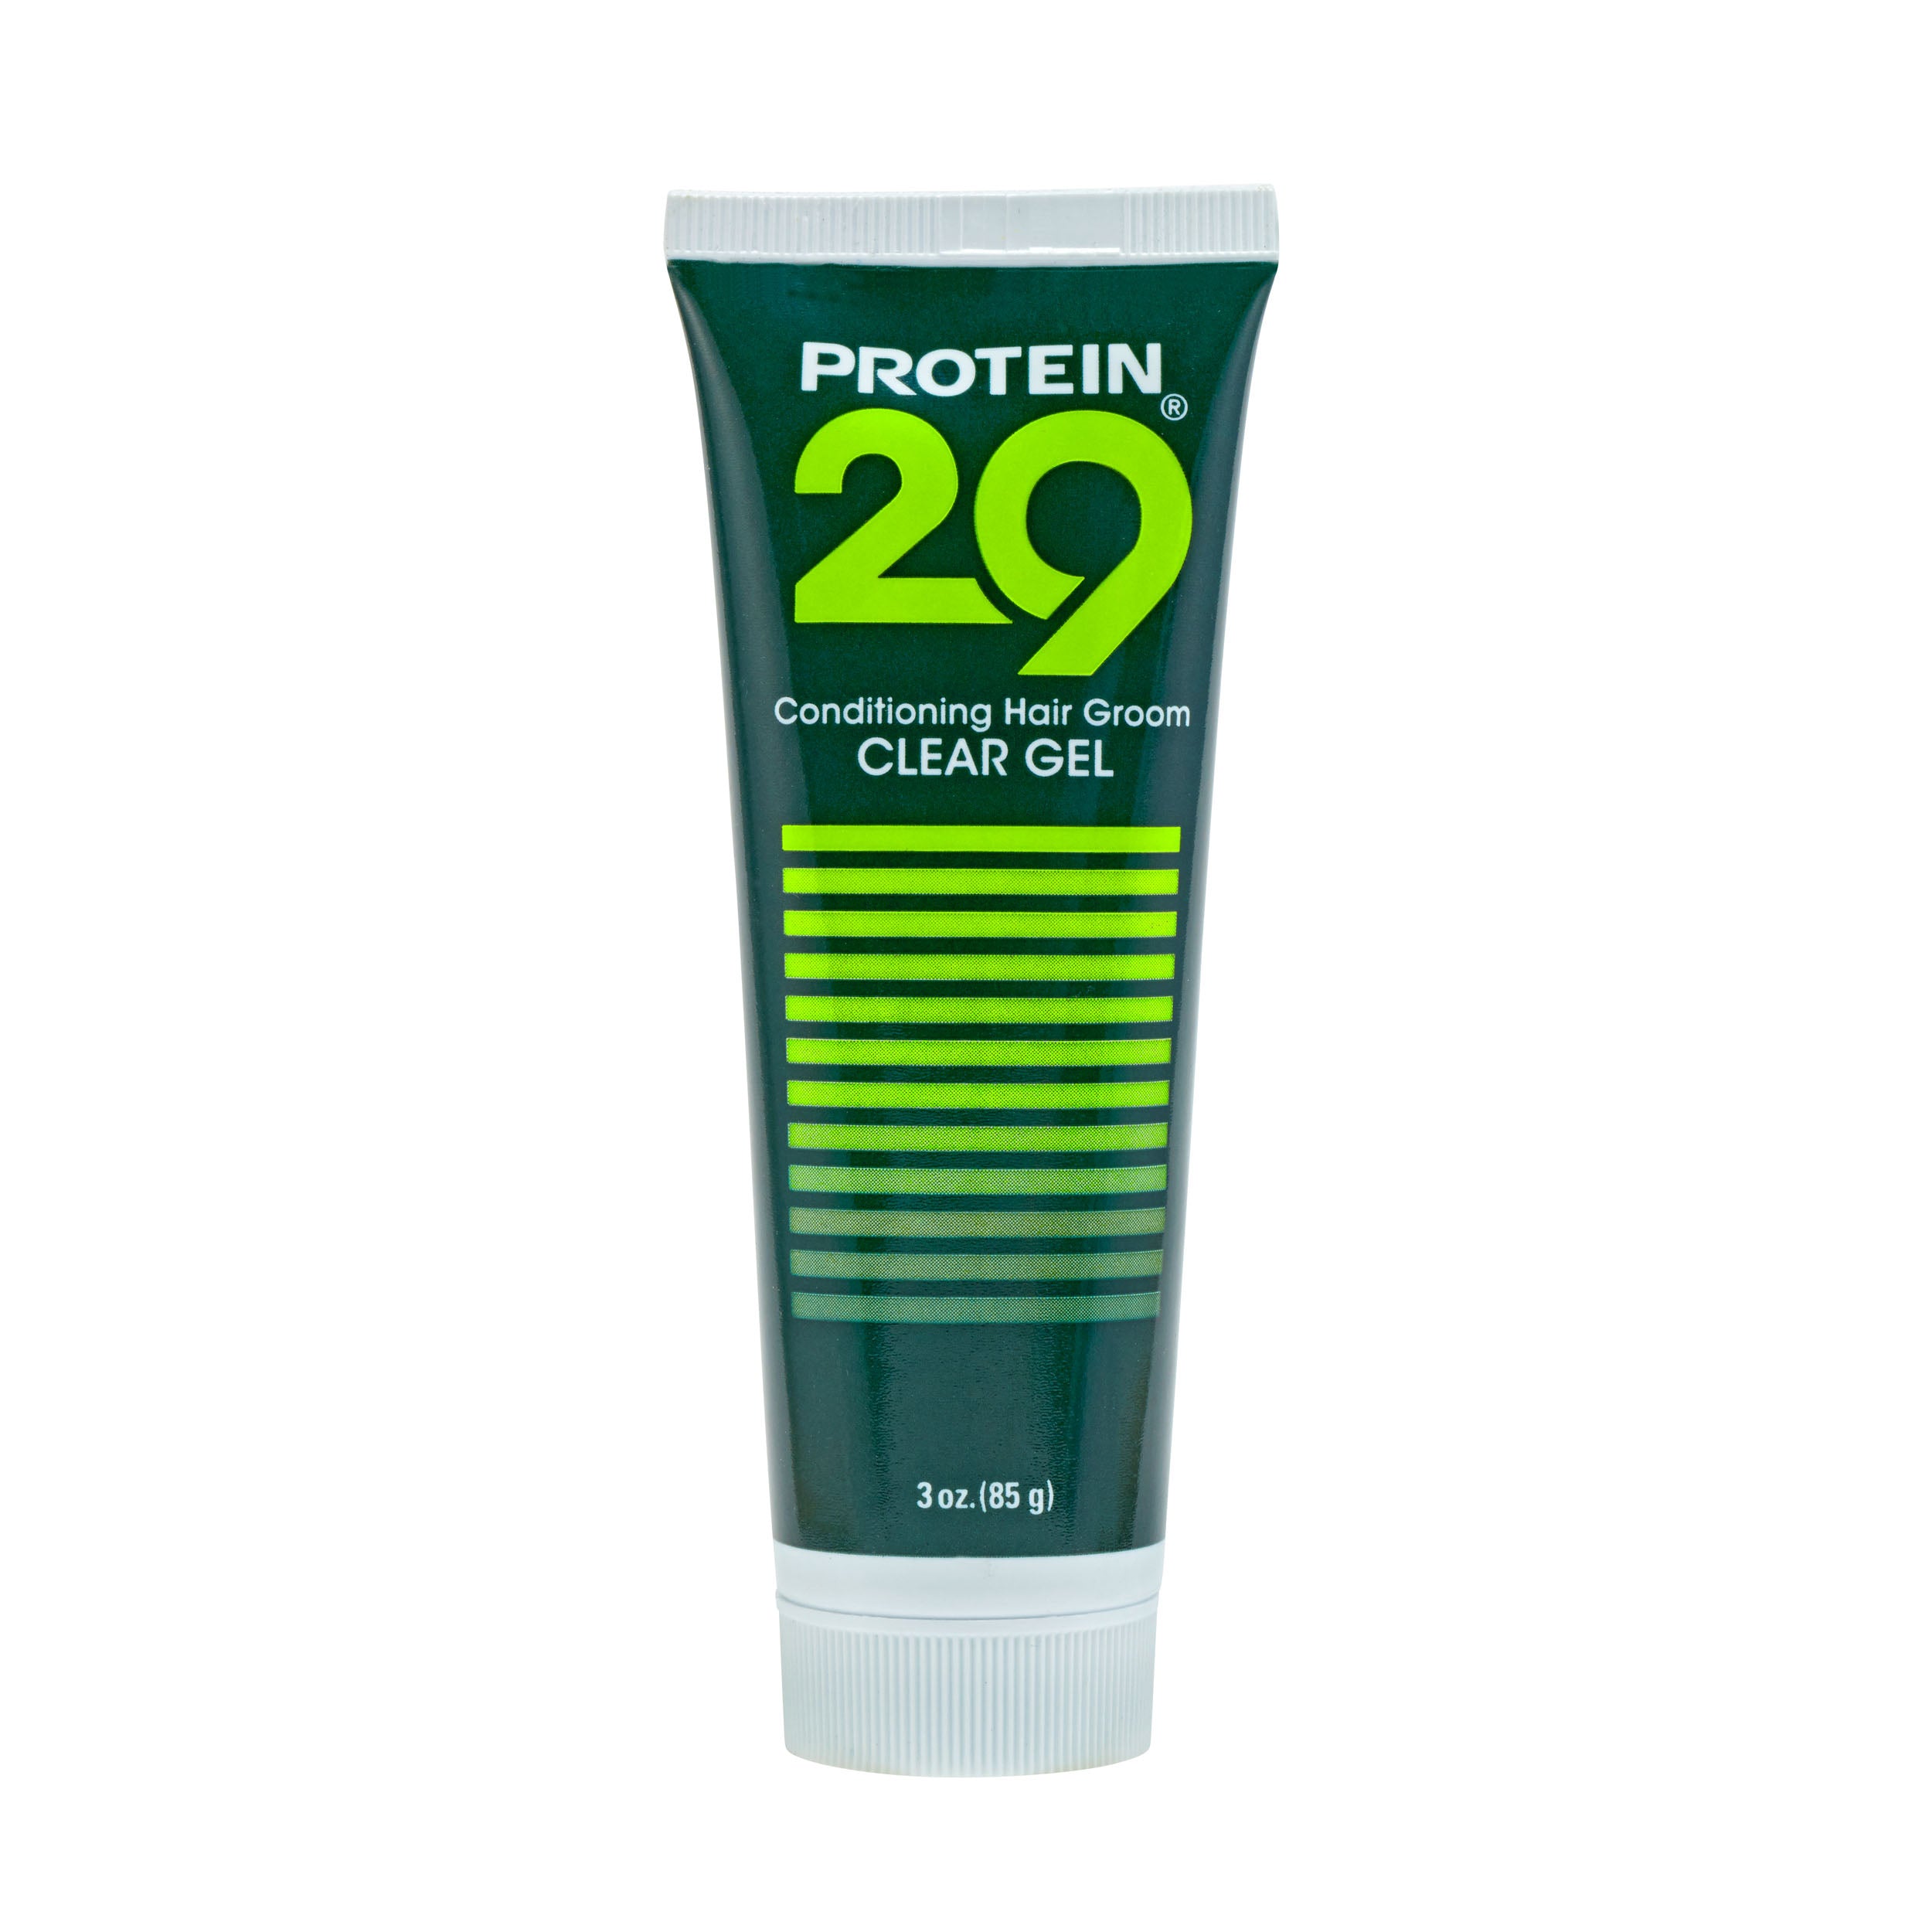 Protein 29 Conditioning Hair Groom Clear Gel